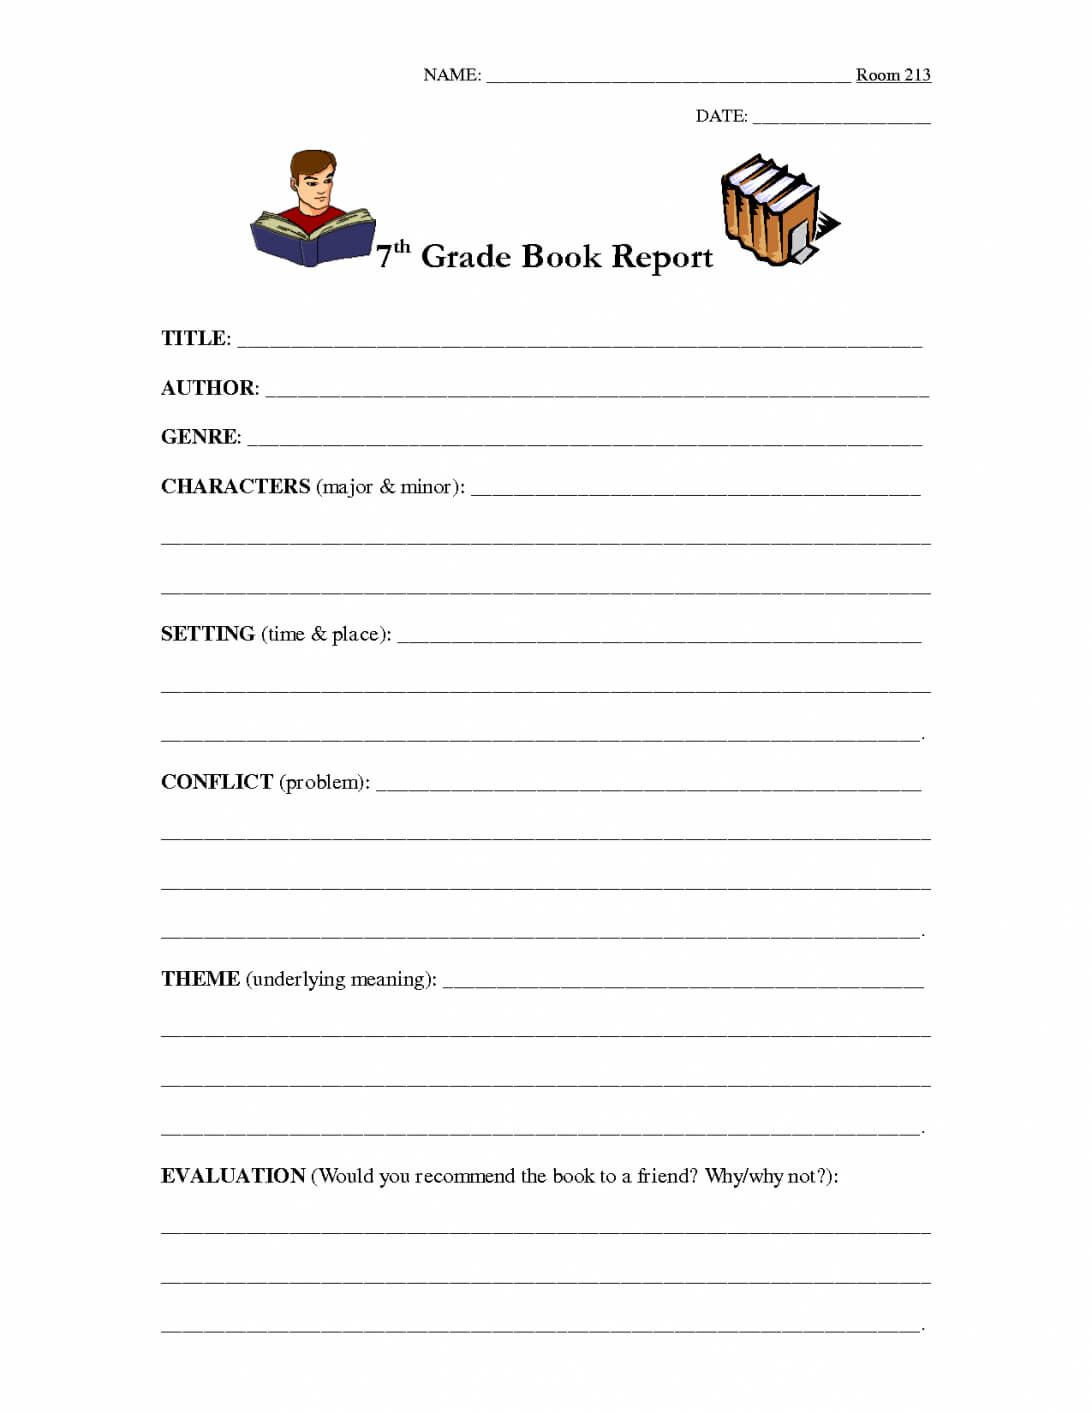 Book Report Template Review Sample Paper Apa Press 5Th Grade With High School Book Report Template